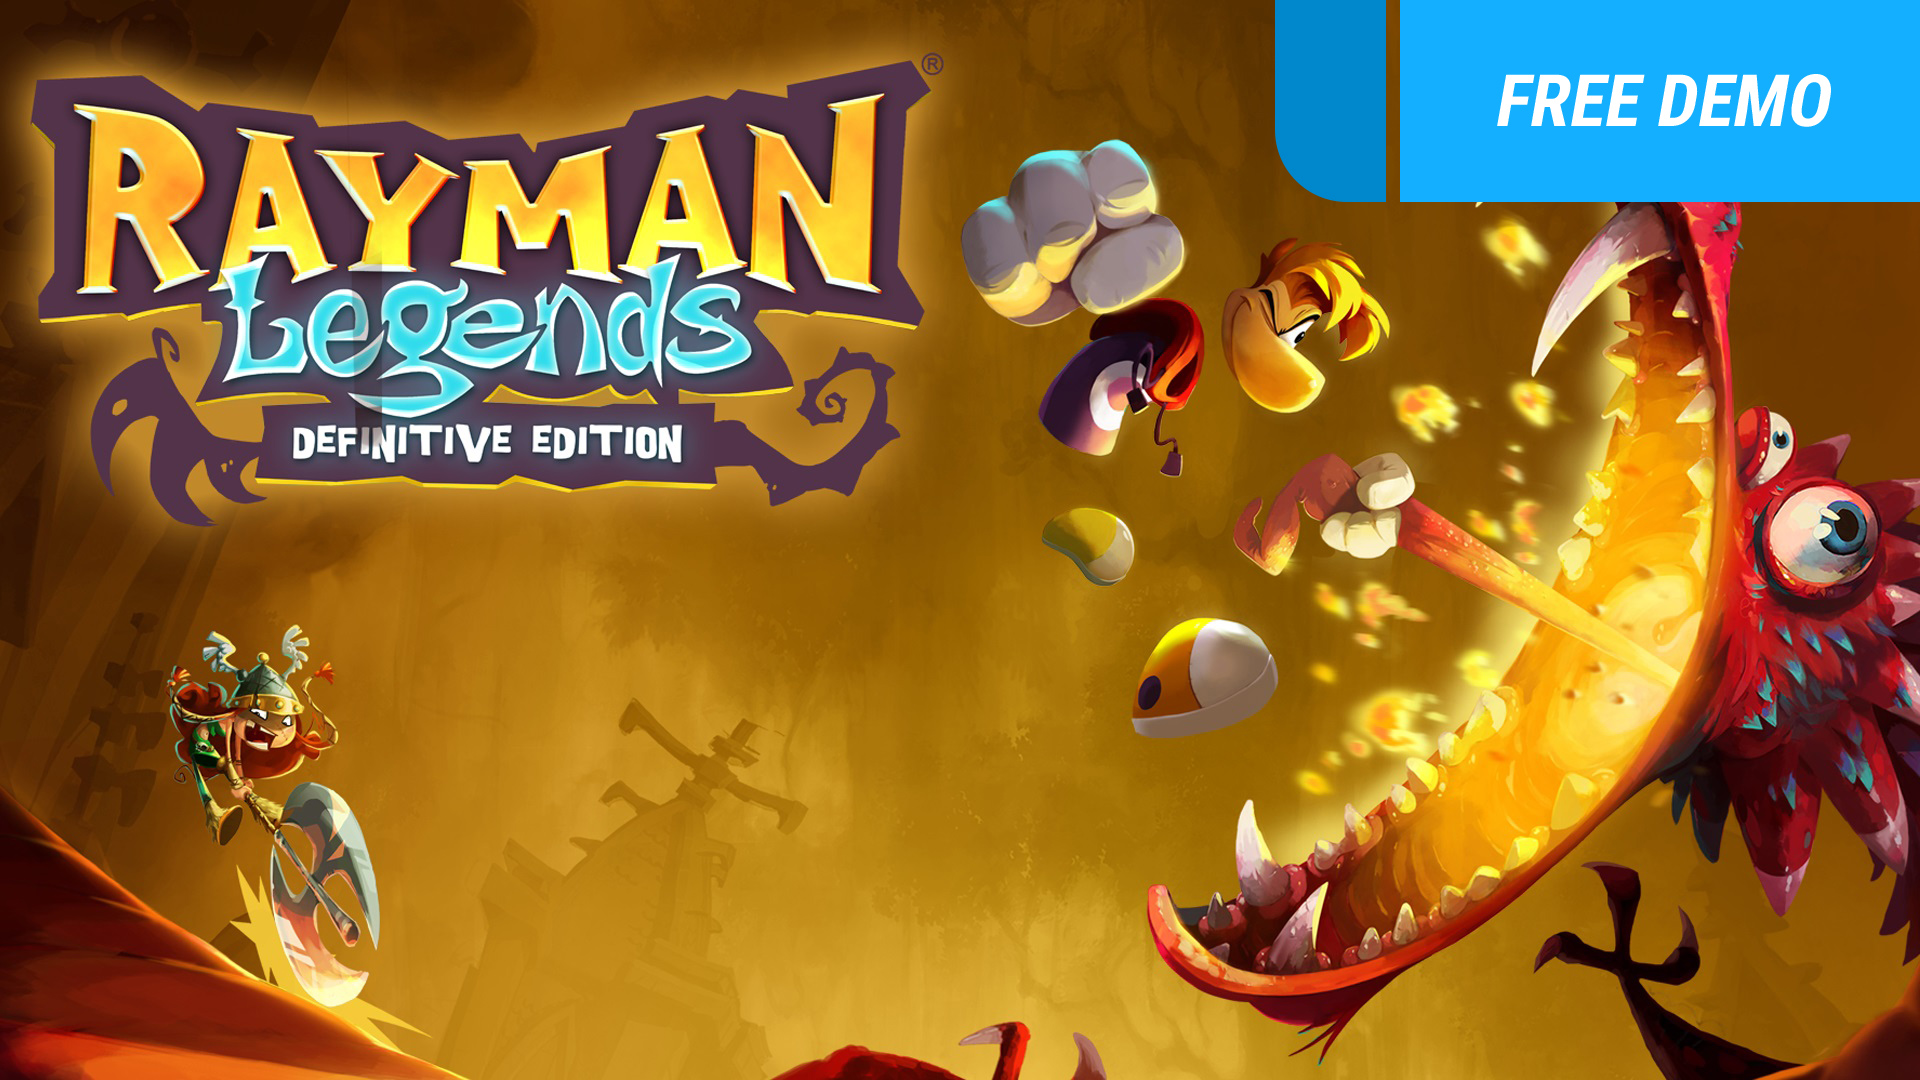 download rayman on switch